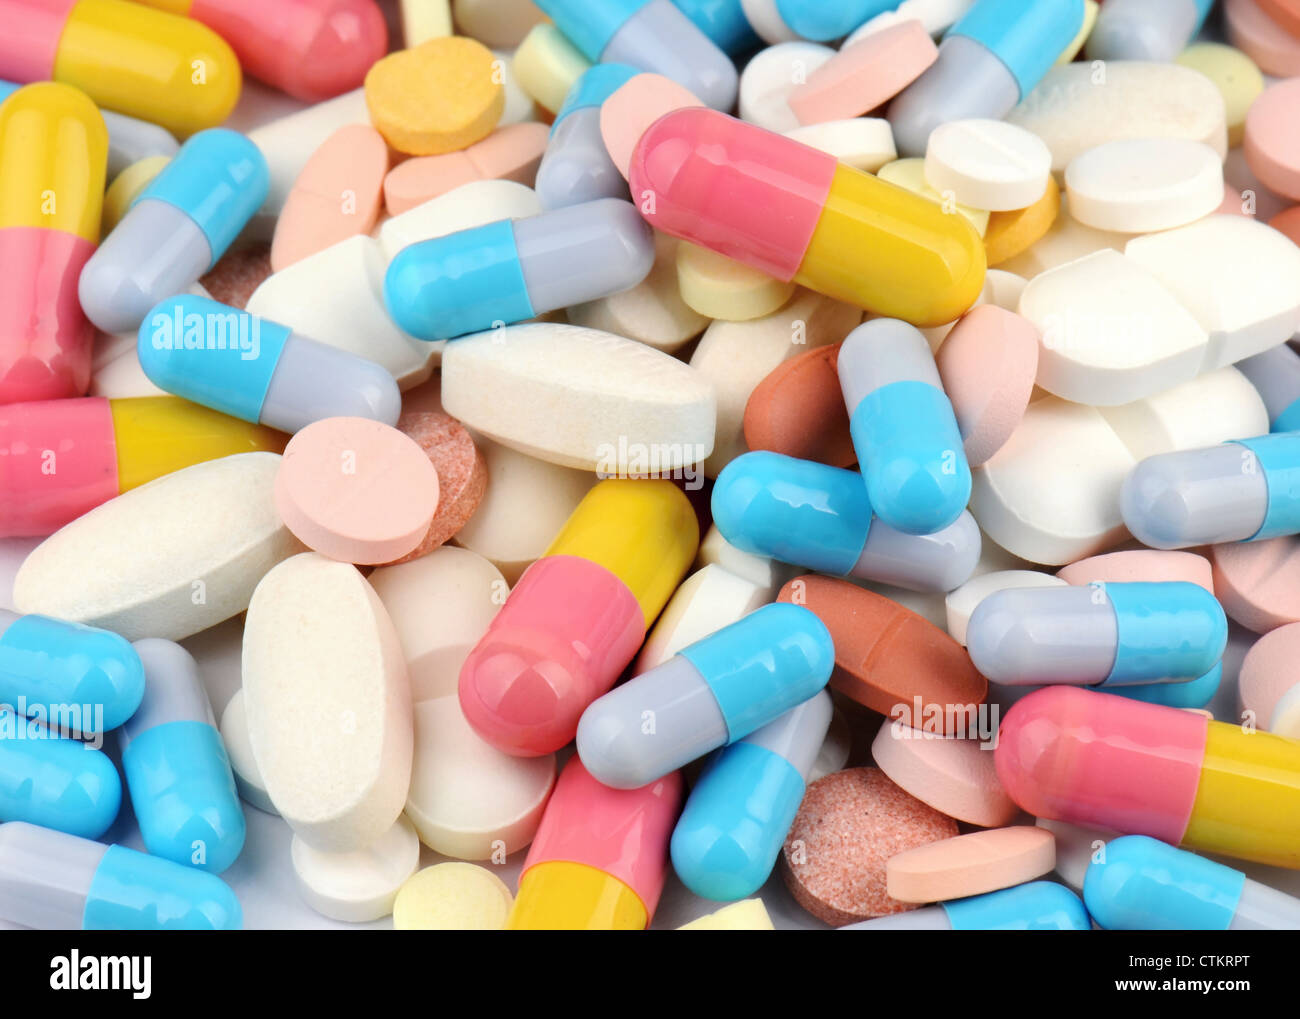 Capsules and tablets as a background Stock Photo